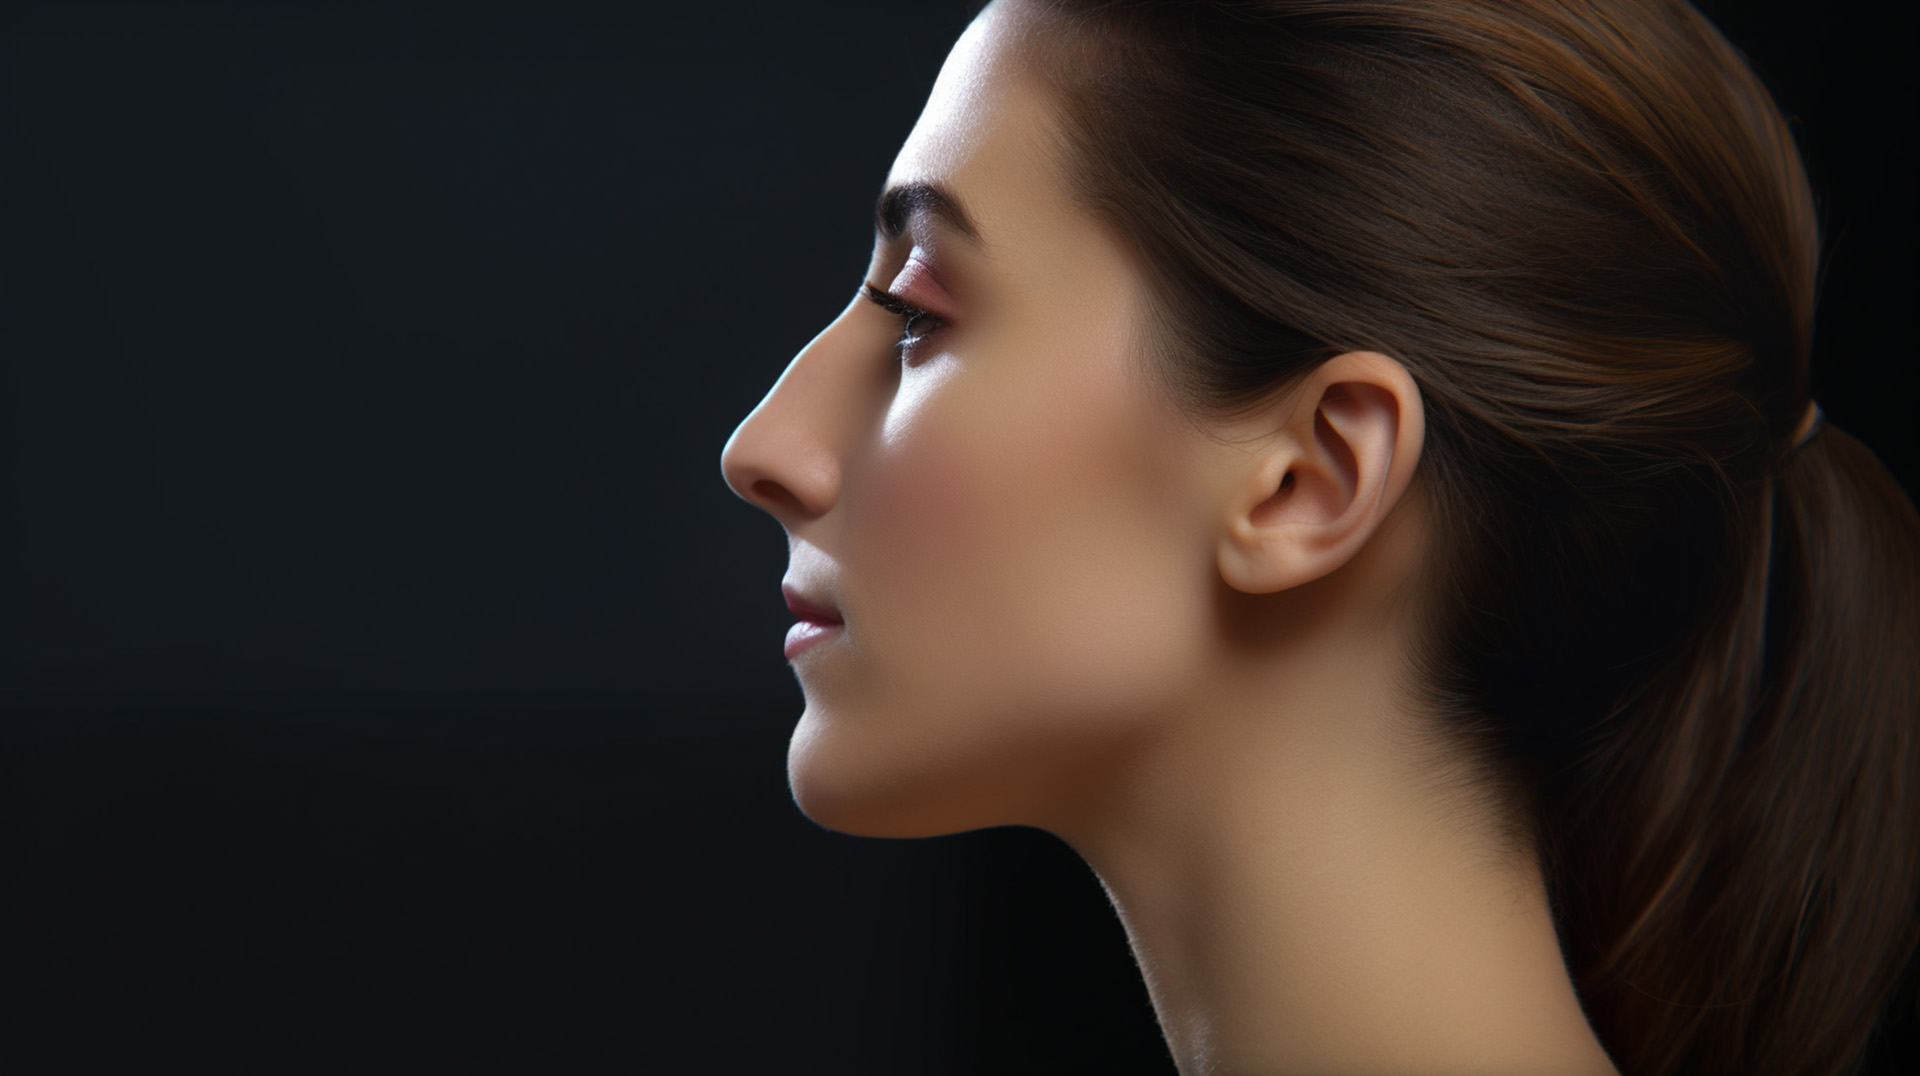 Find a Rhinoplasty Clinic & Surgeon in St. Thomas, ON